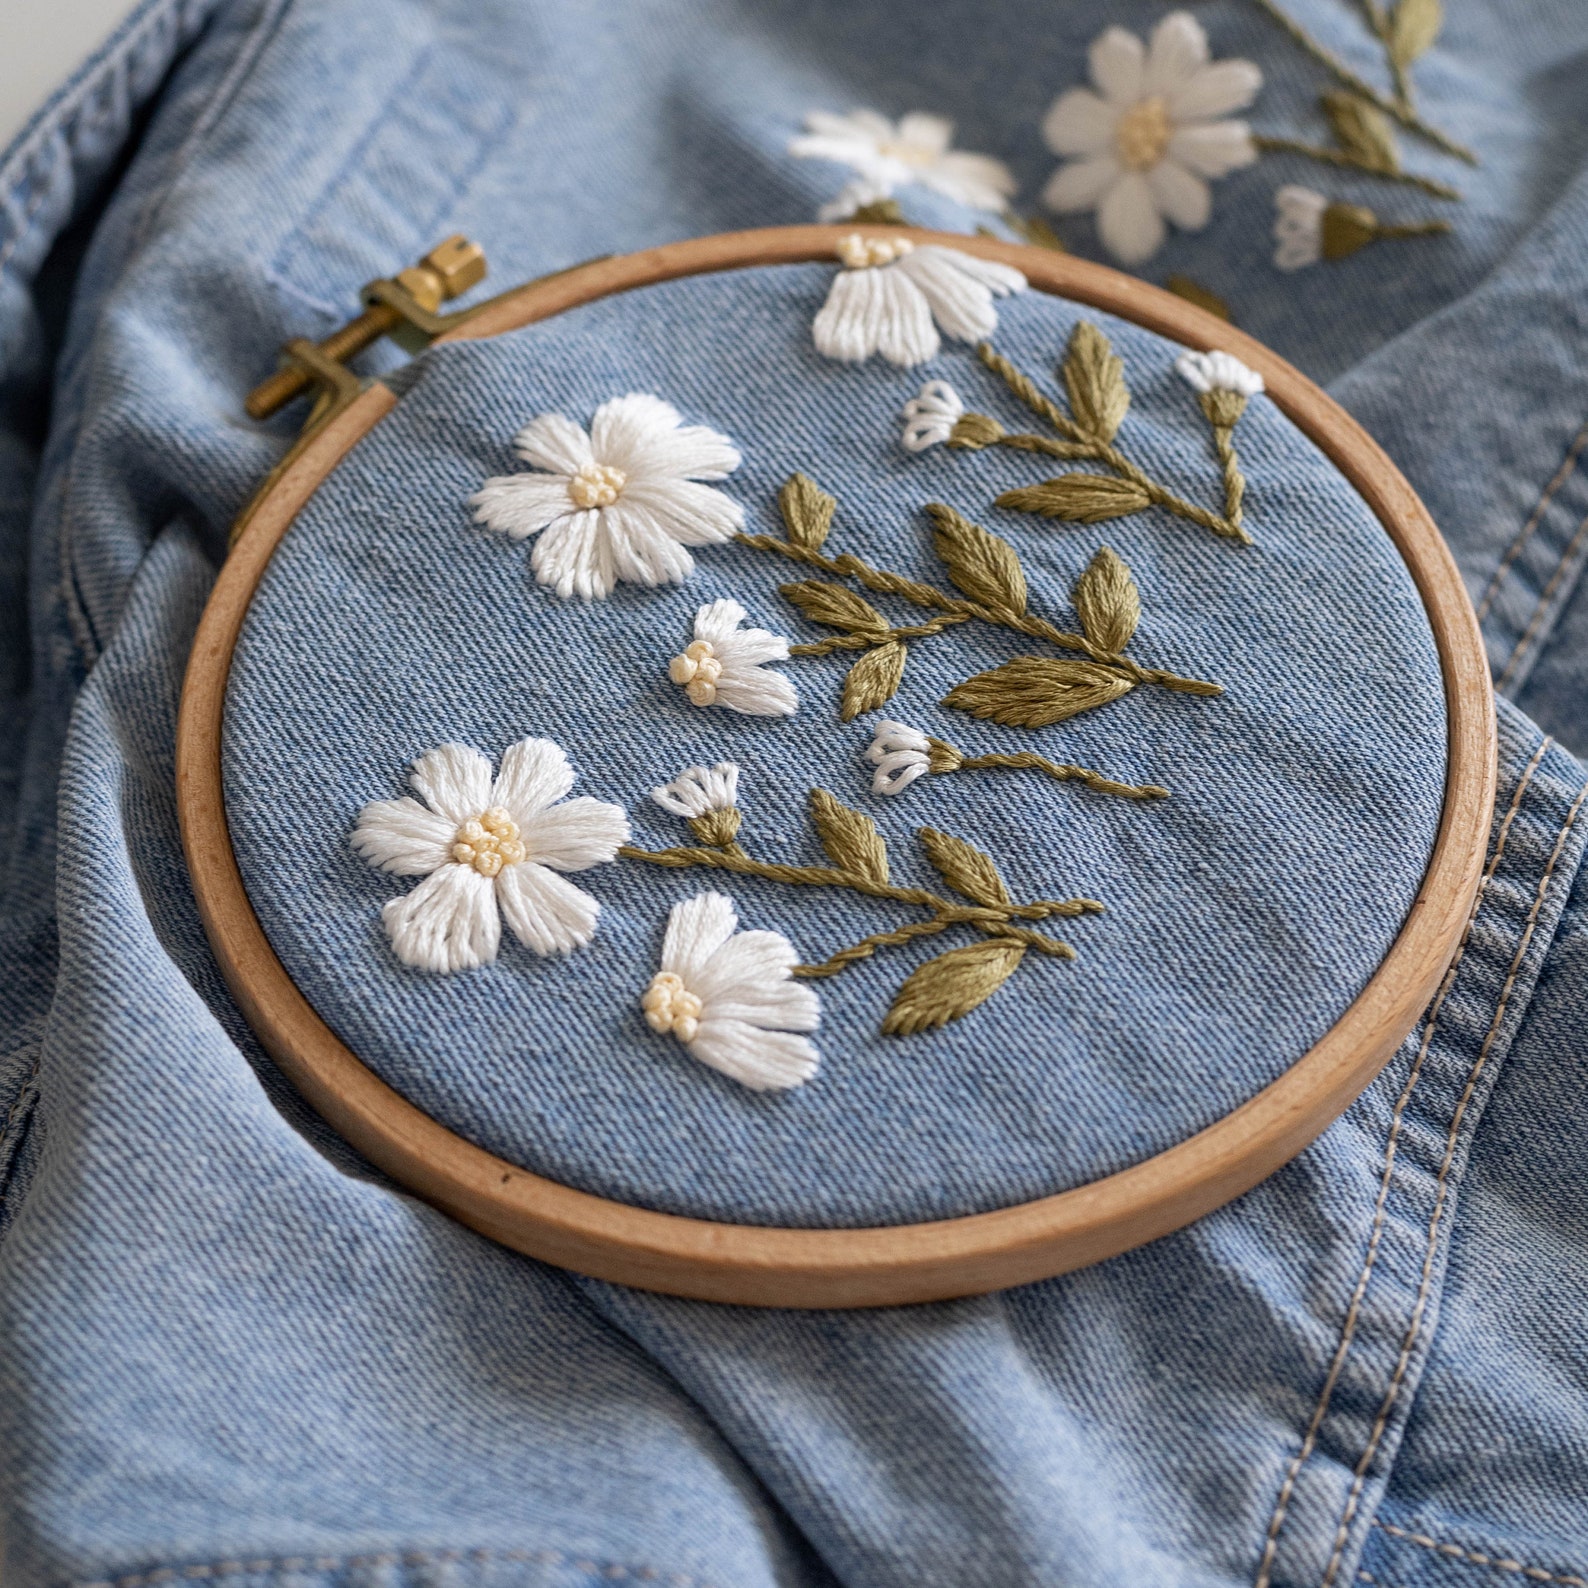 Floral Embroidery Pattern Beginner Embroidery PDF Pattern - Etsy